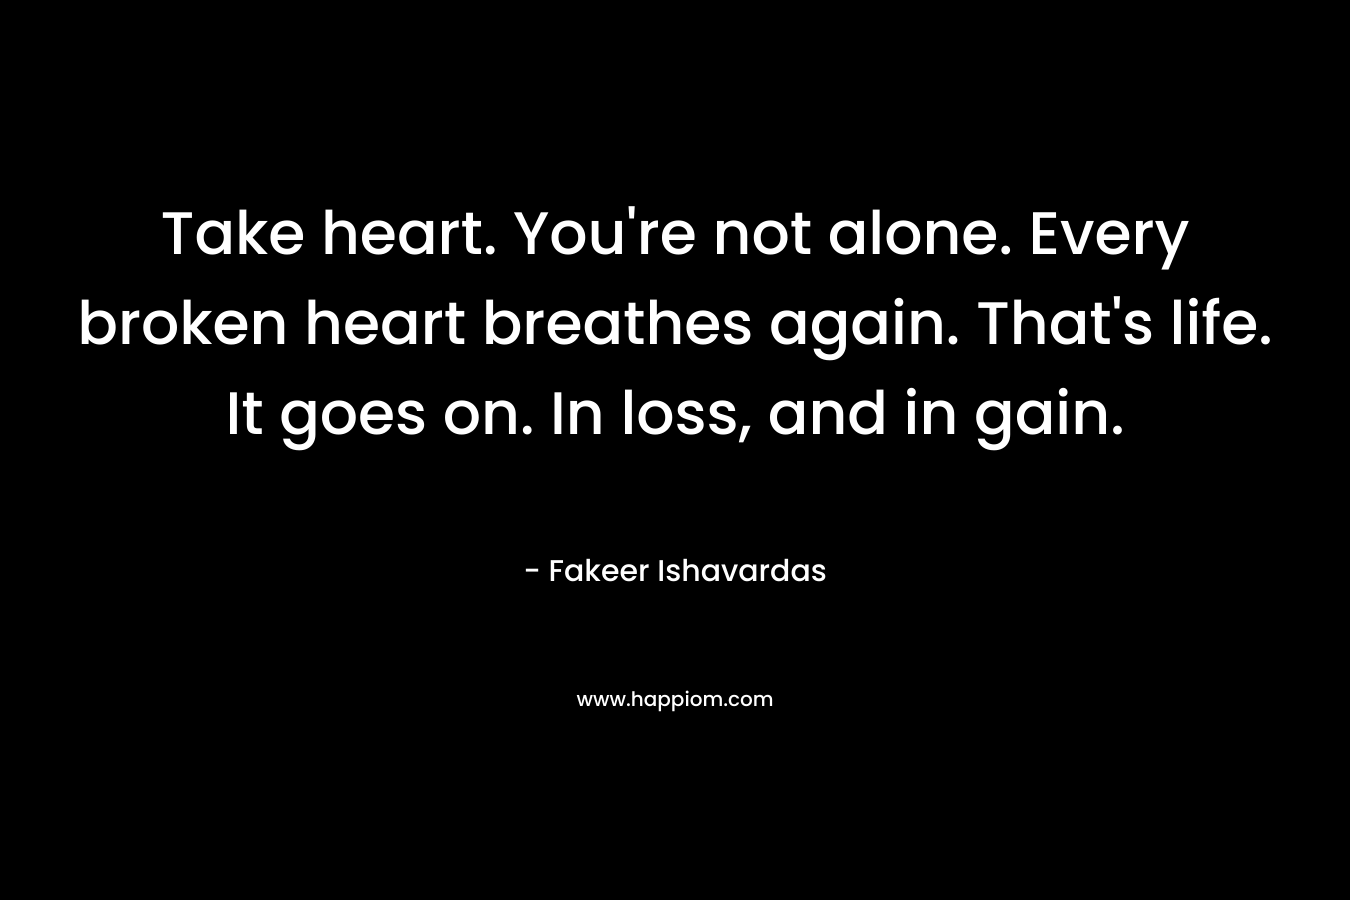 Take heart. You're not alone. Every broken heart breathes again. That's life. It goes on. In loss, and in gain.